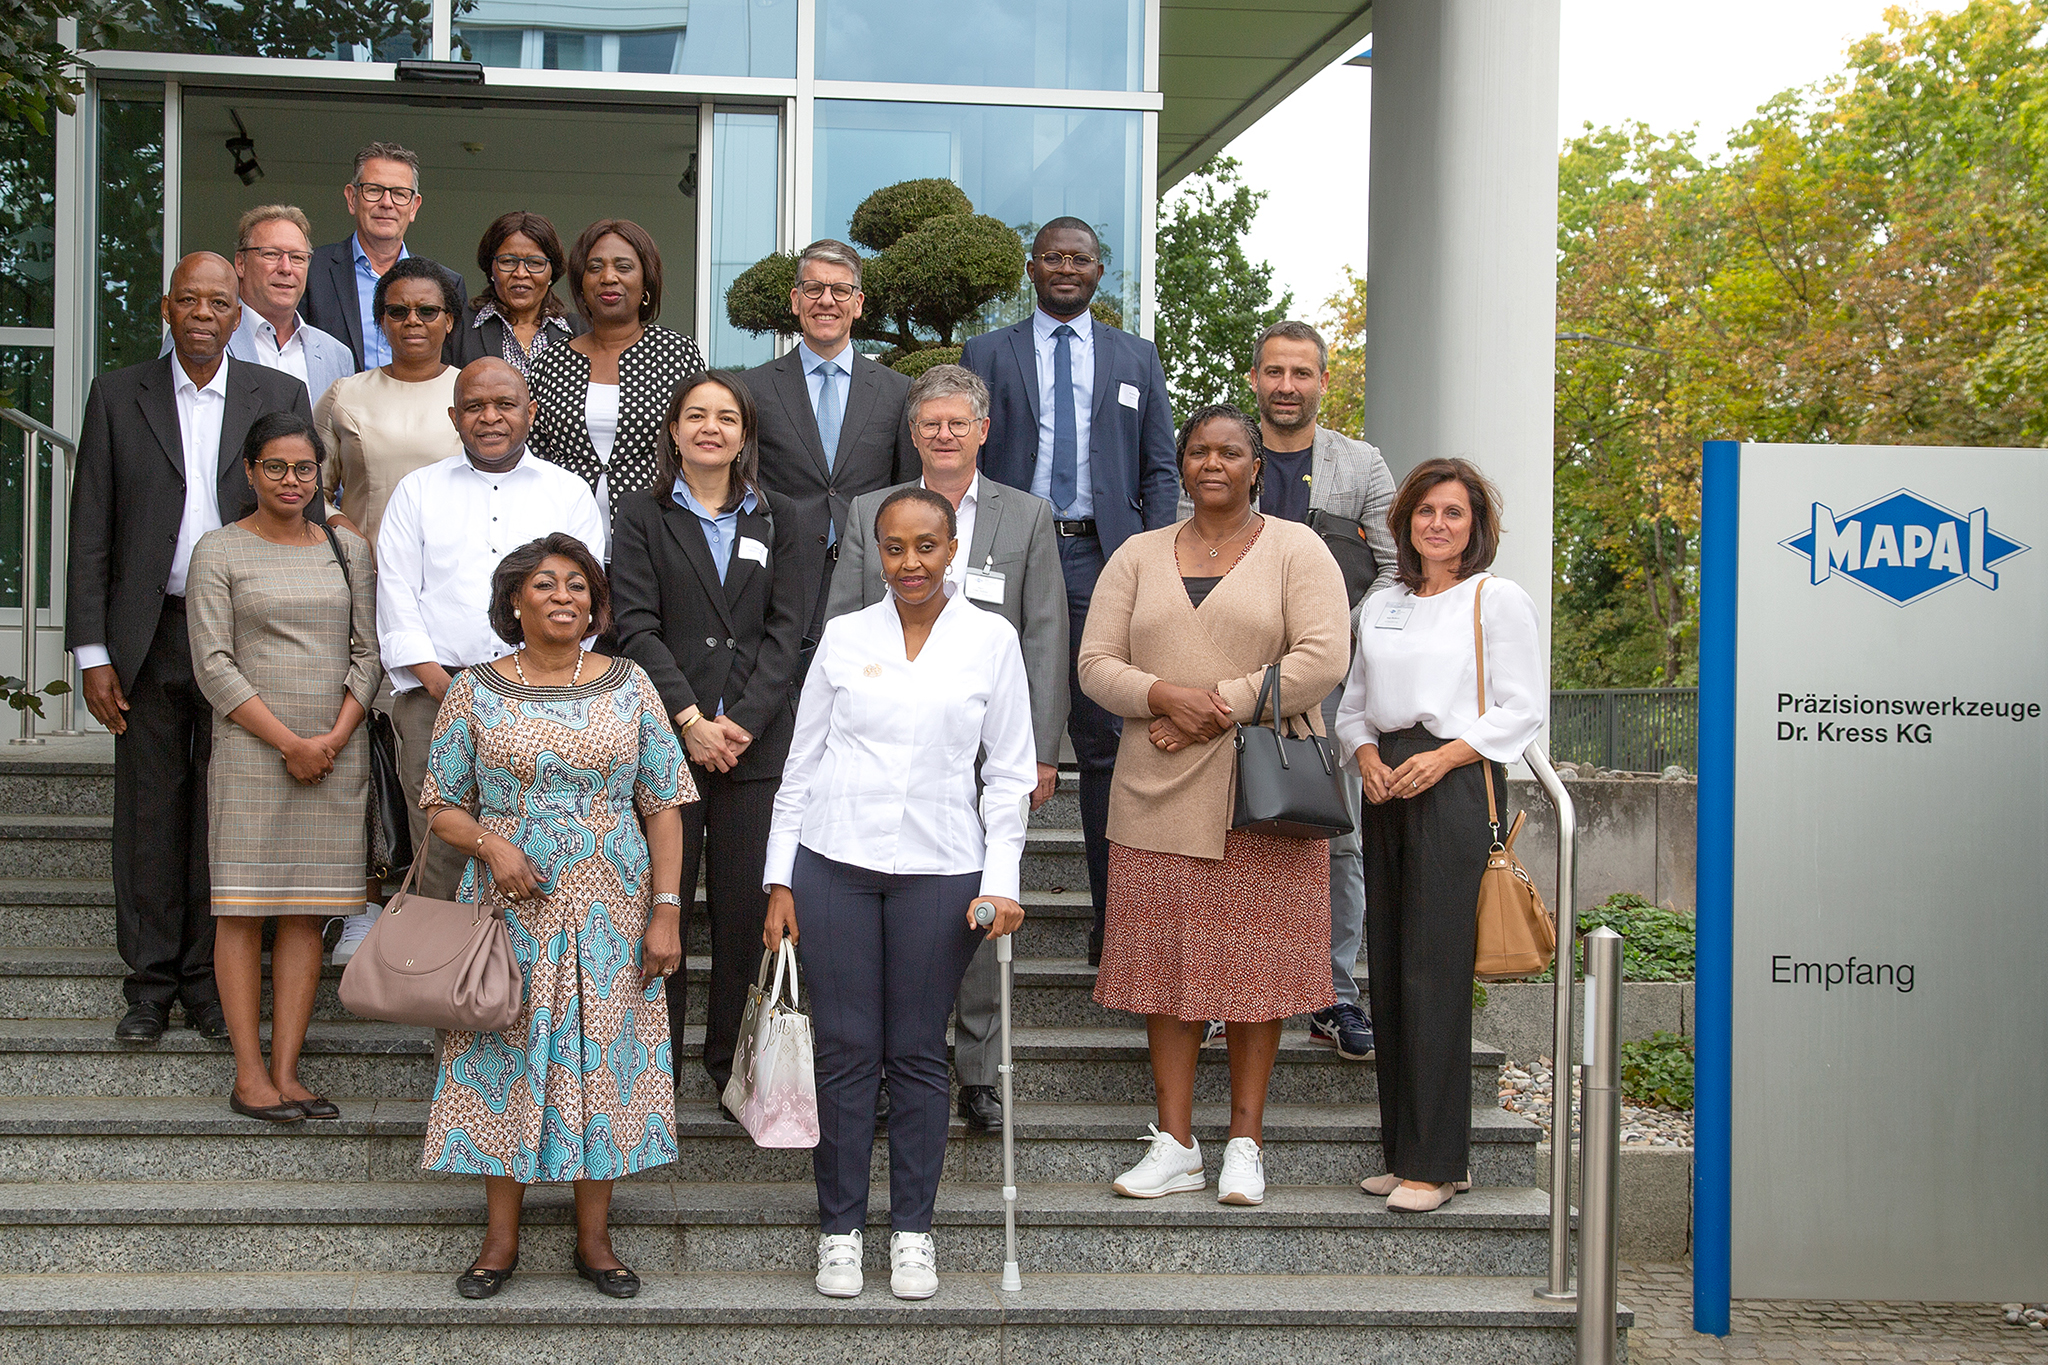 The delegation of the Southern African Development Community (SADC) in front of the entrance to the MAPAL HQs in Aalen.